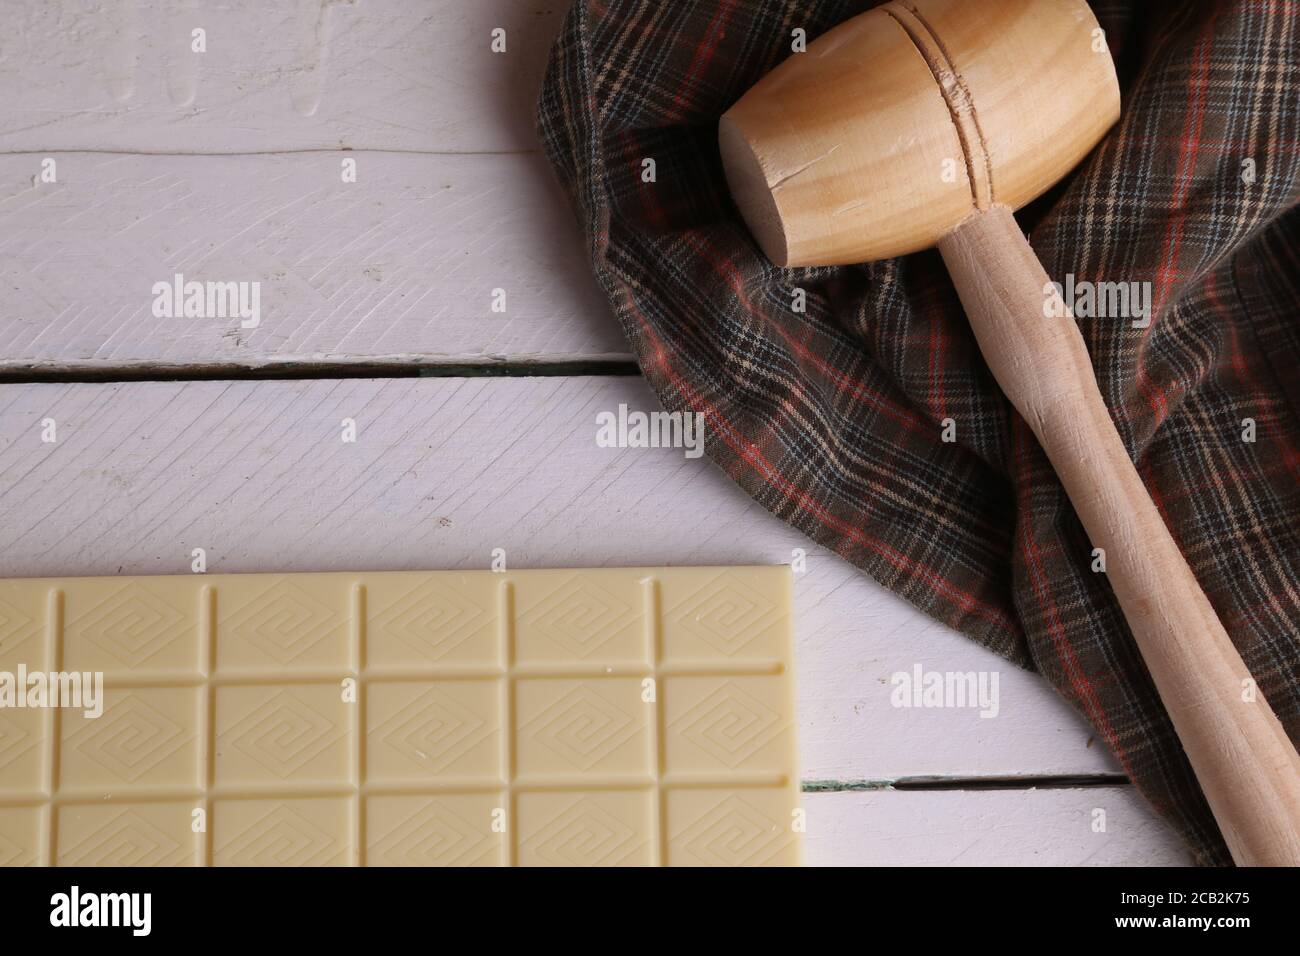 Overhead shot of a wooden small mallet near a bar of white chocolate Stock Photo